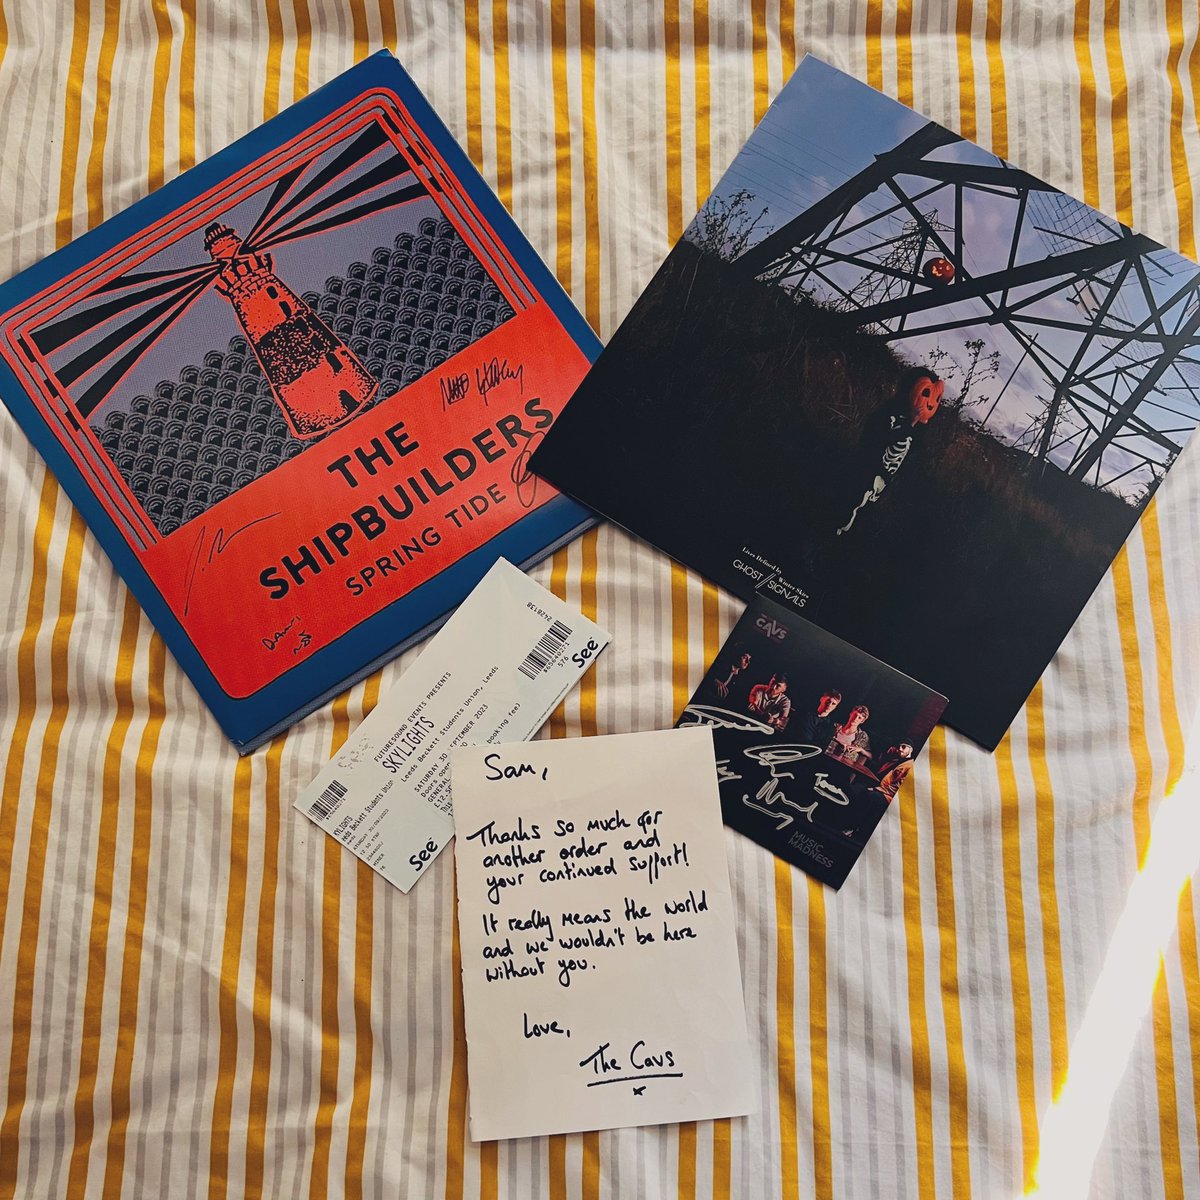 Shout out to all these legends - look at all my deliveries today! @ghostsignalsx can’t wait to listen, thank you SO MUCH 🤍 @CavsBand always got your backs, amazing EP ❤️ @TheShipbuilders one of the best albums of the year 🧡🎵 @SkylightsYRA bring on LEEDS 🥳